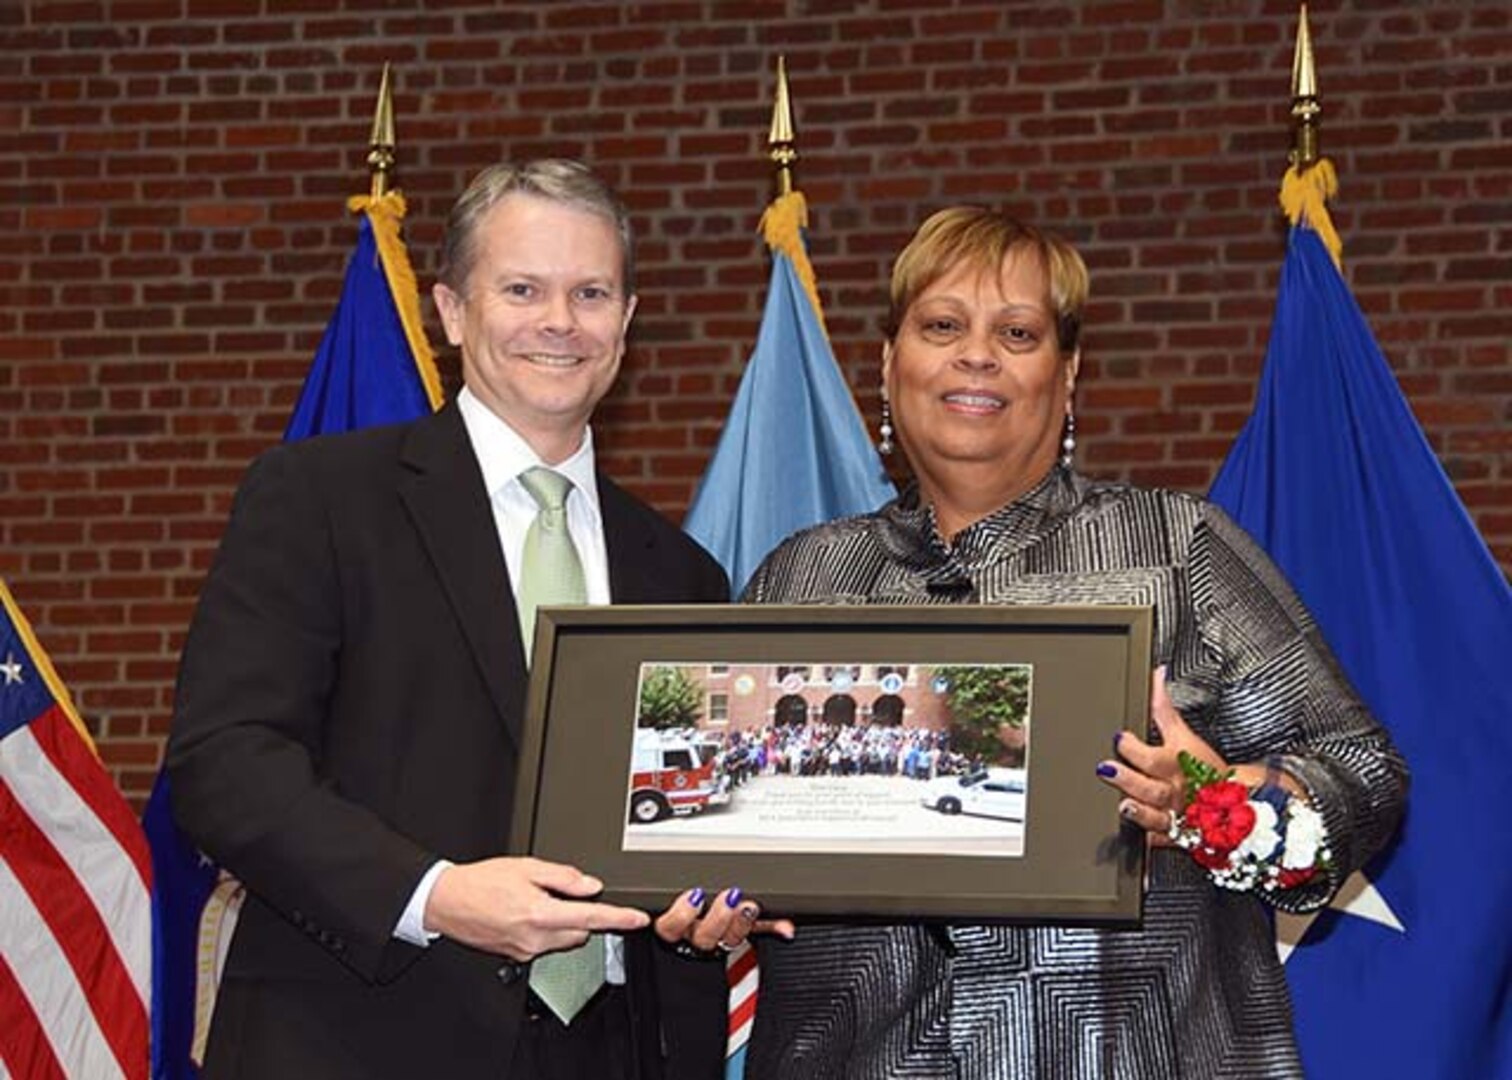 David Gibson, site director, DLA Installation Support at Richmond, Virginia, presents Lucy Lewis, president of the American Federation of Government Employees Local 1992, with a commemorative photo of installation support employees during a ceremony Nov. 24, 2015 in the Frank B. Lotts Conference Center on the occasion of her retirement from federal service after 41 years.